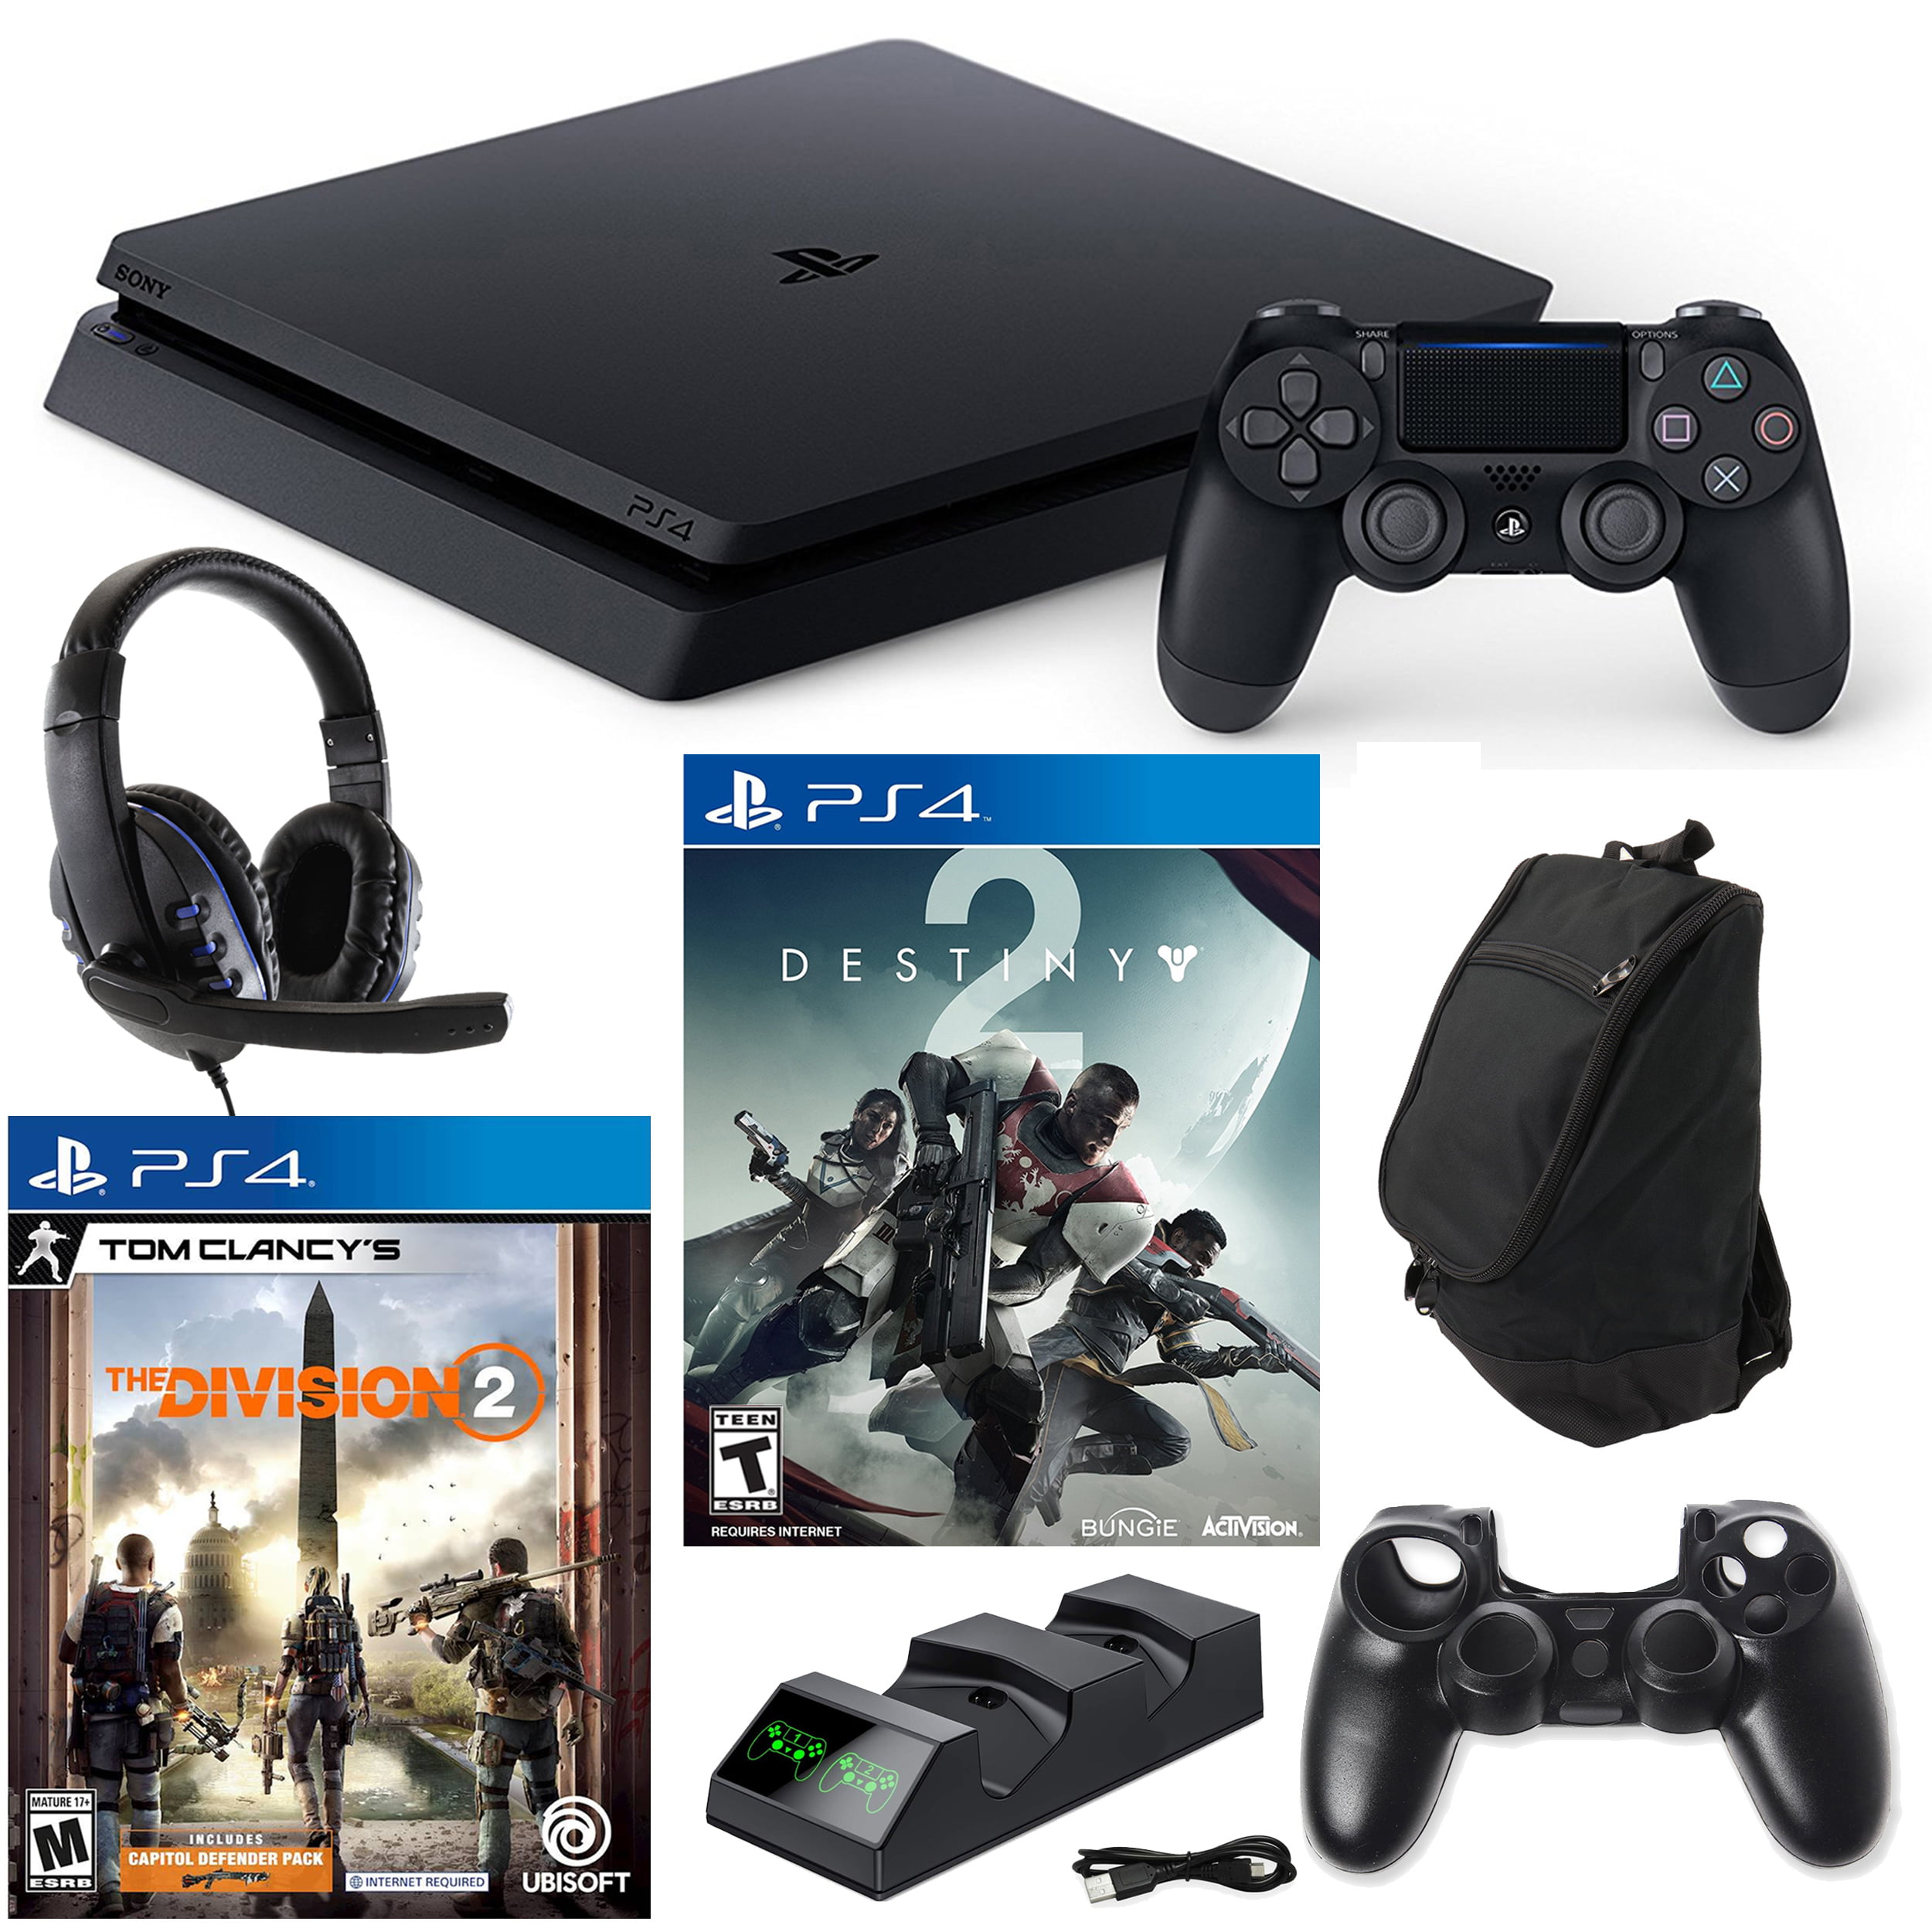 4 Slim 1TB Console with Division 2, 2 and Accessories and Carry Bag - Walmart.com